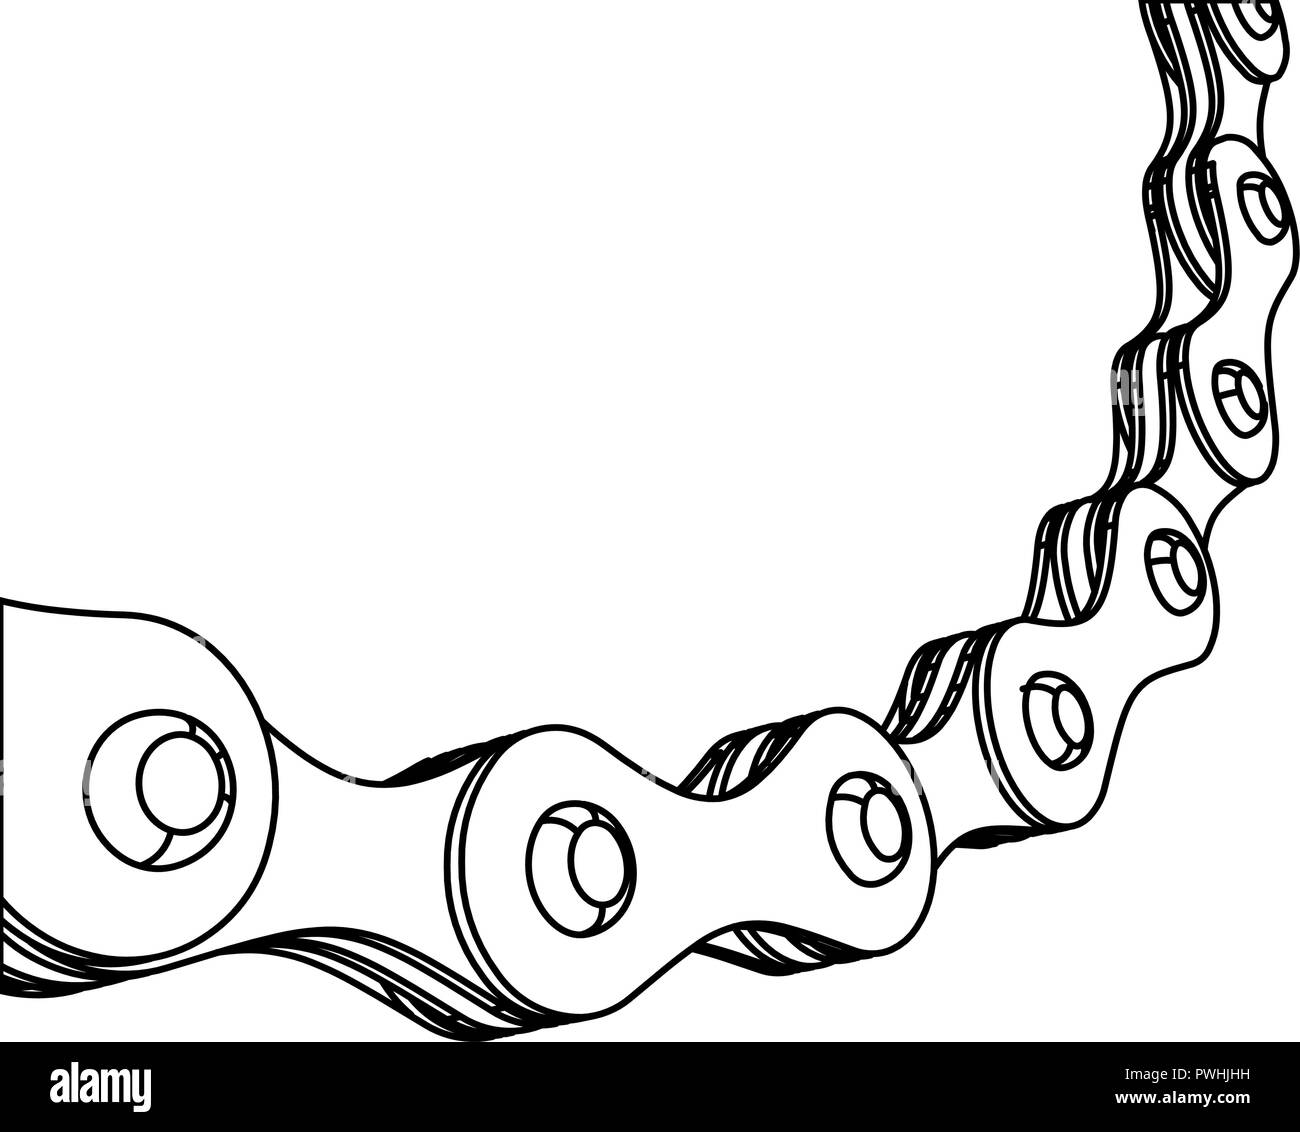 Bike chain drawing Black and White Stock Photos & Images - Alamy